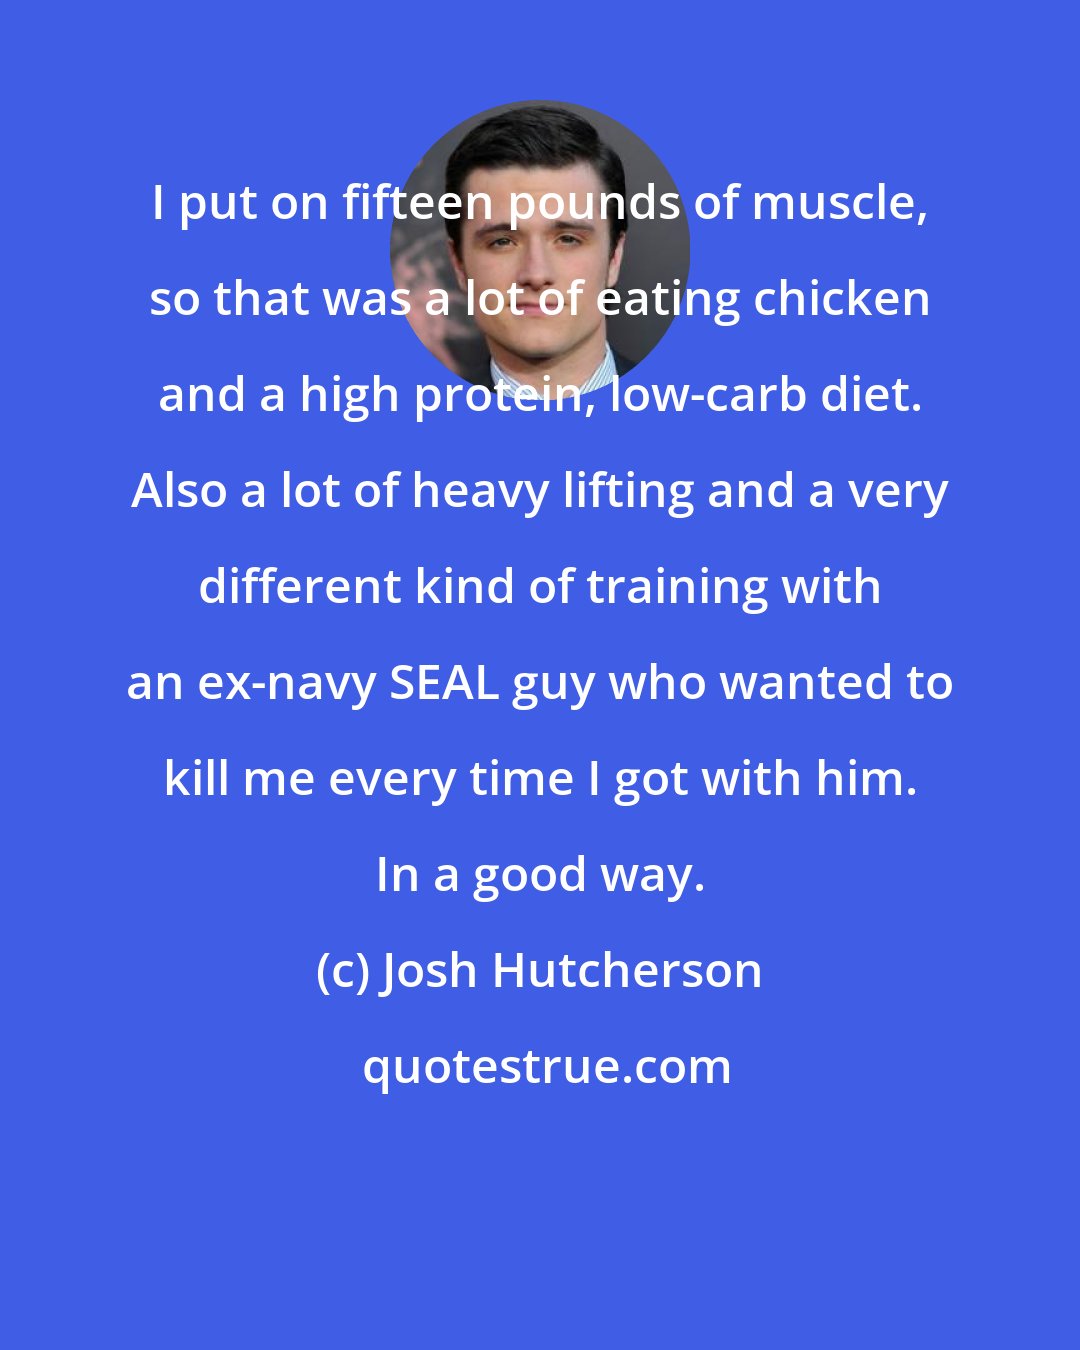 Josh Hutcherson: I put on fifteen pounds of muscle, so that was a lot of eating chicken and a high protein, low-carb diet. Also a lot of heavy lifting and a very different kind of training with an ex-navy SEAL guy who wanted to kill me every time I got with him. In a good way.